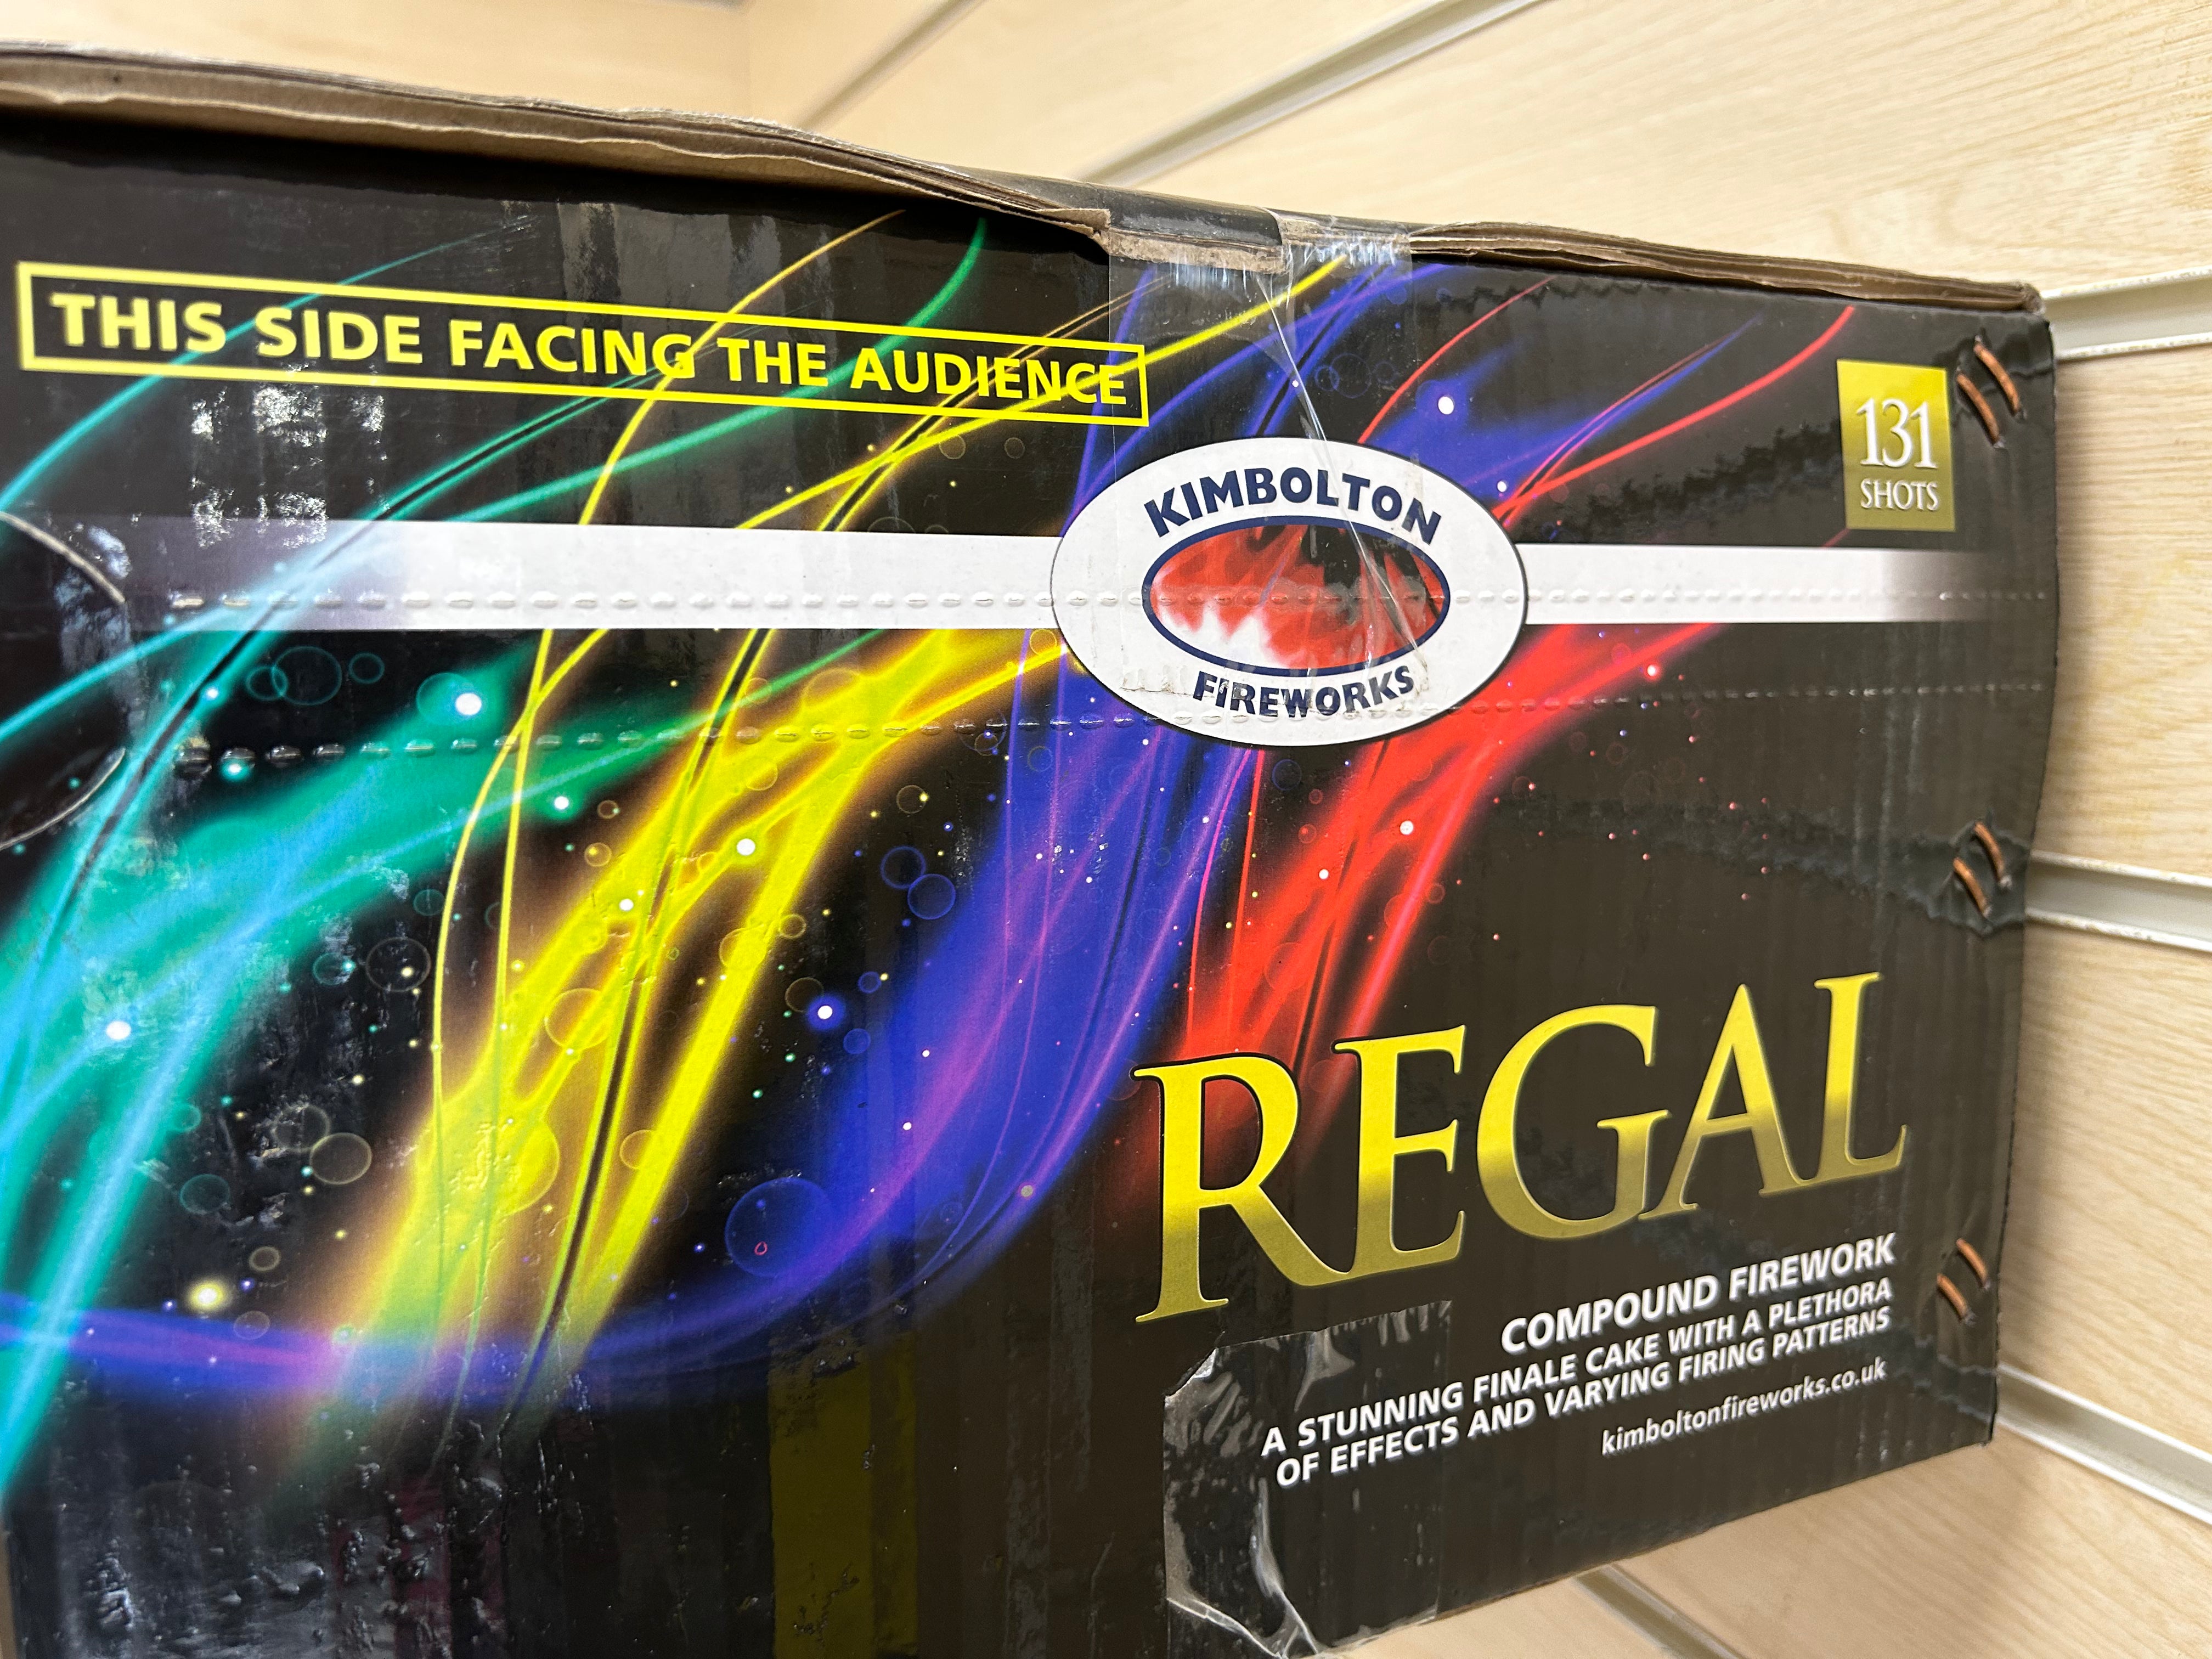 Regal , Massive Fireworks!! WOW WOW WOW !!! Insane price for this !!!